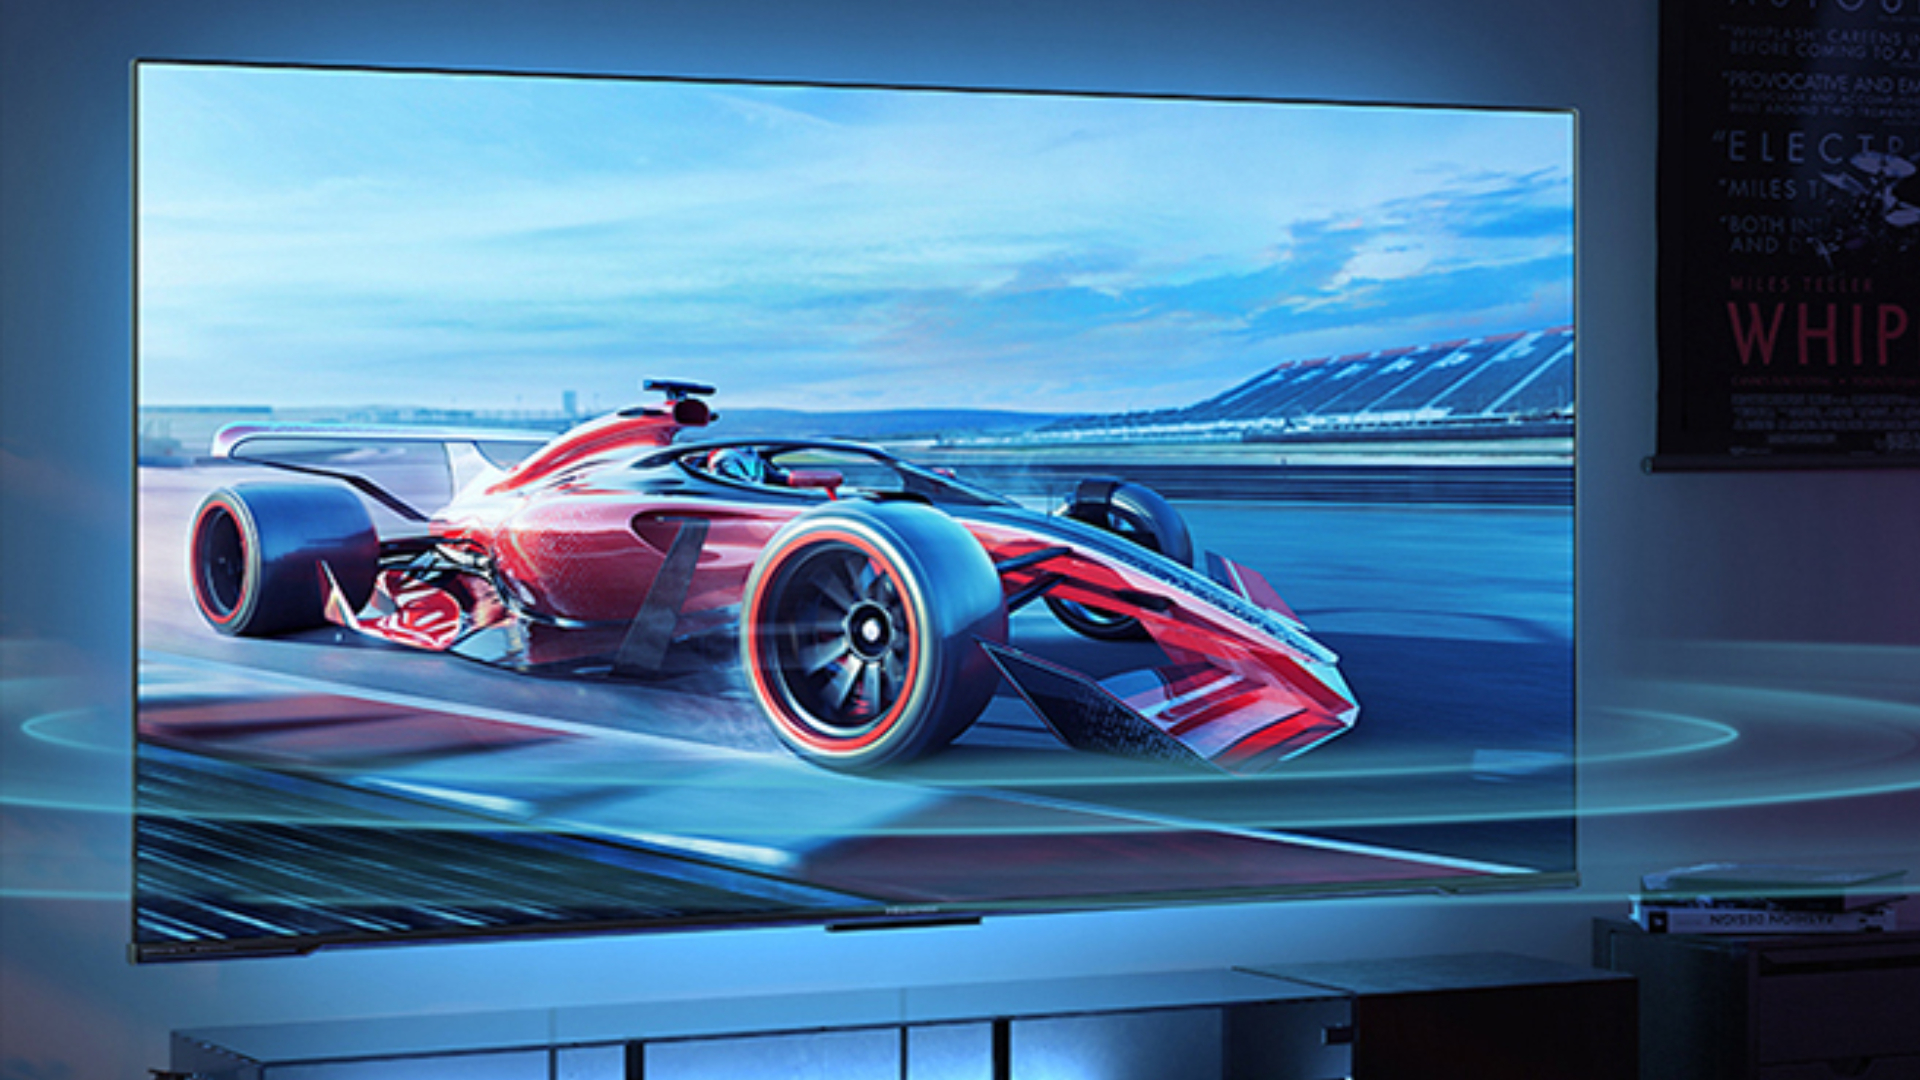 240Hz 65-inch gaming TVs are now a thing, thanks to Hisense